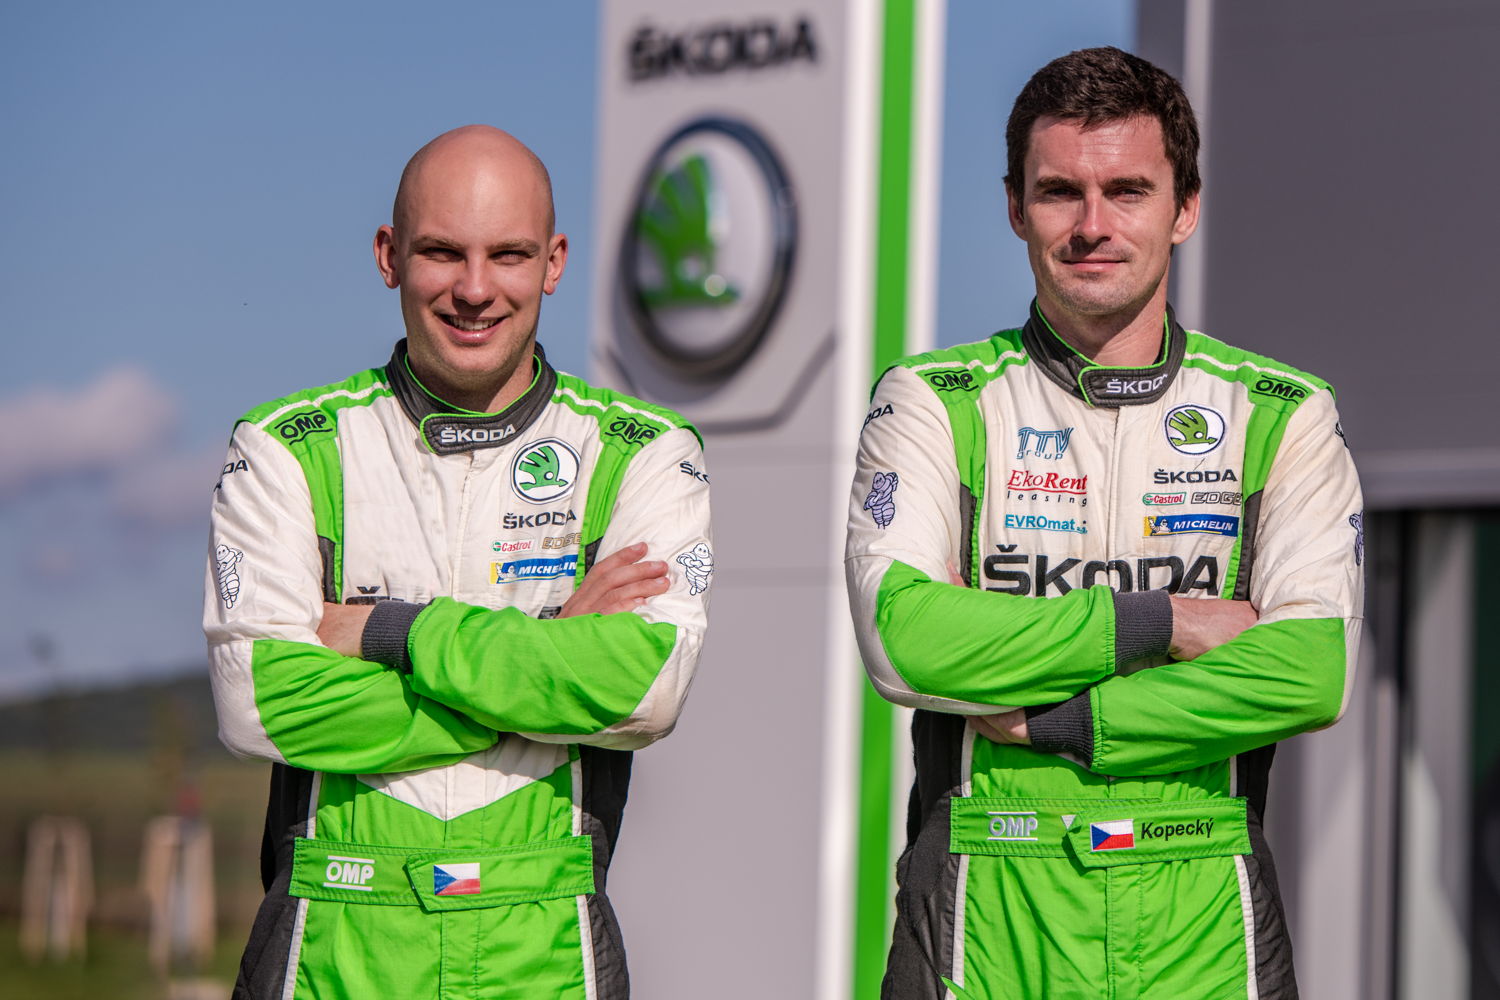 ŠKODA factory driver Jan Kopecký will make his debut at Wales Rally GB, twelfth round of the FIA World Rally Championship 2019, together with new co-driver Jan Hloušek.